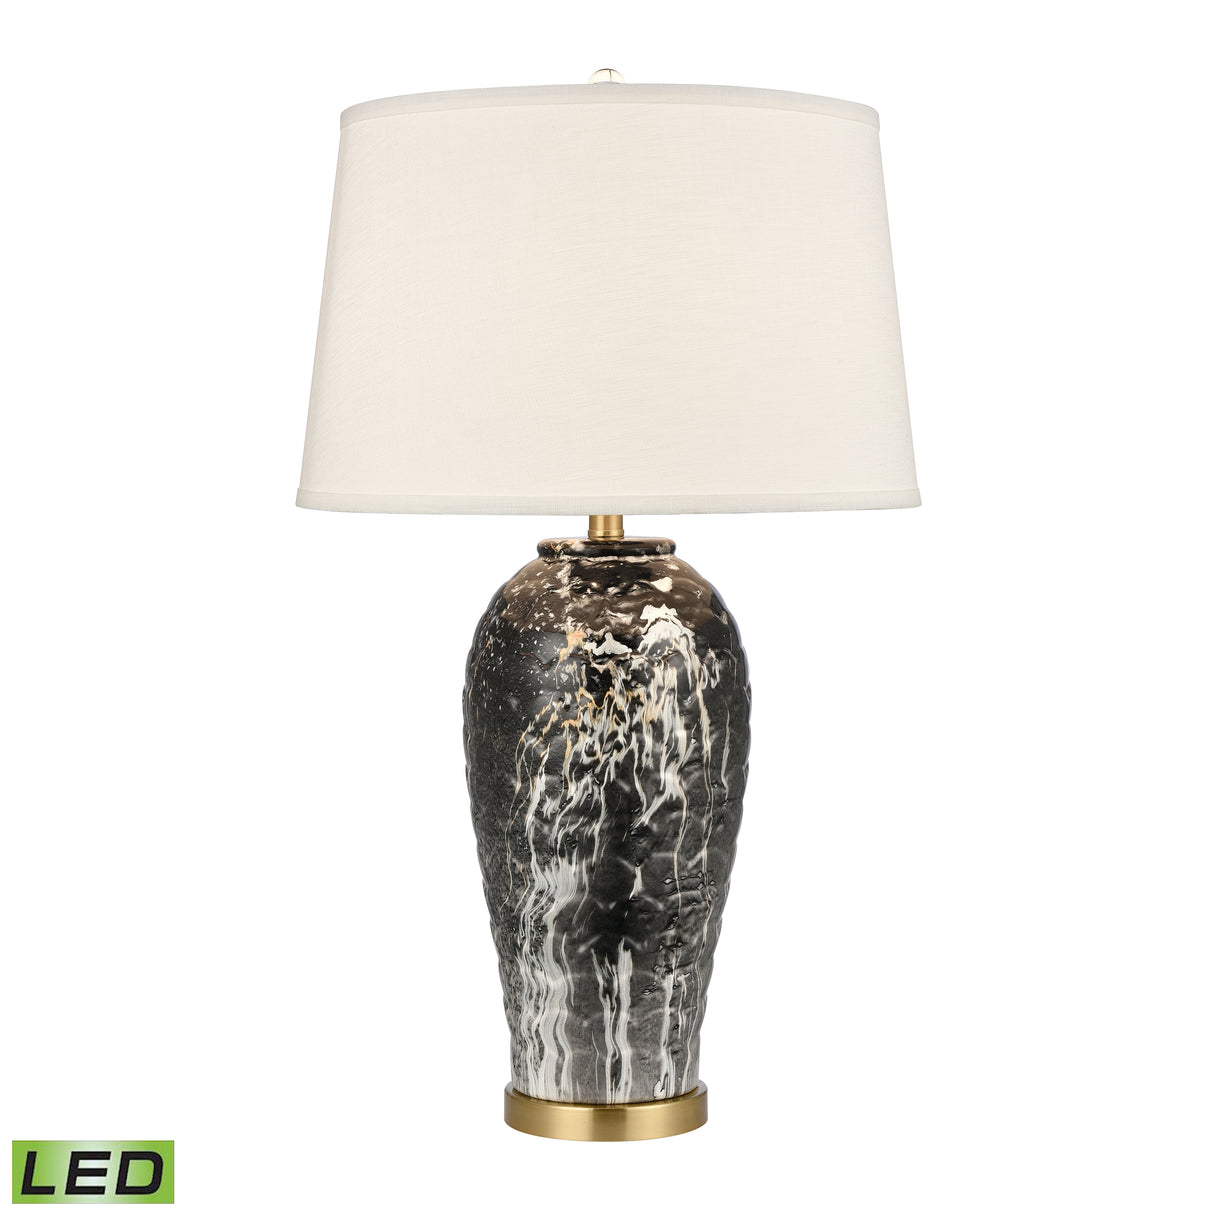 Elk H0019-9543-LED Causeway Waters 30'' High 1-Light Table Lamp - Black - Includes LED Bulb